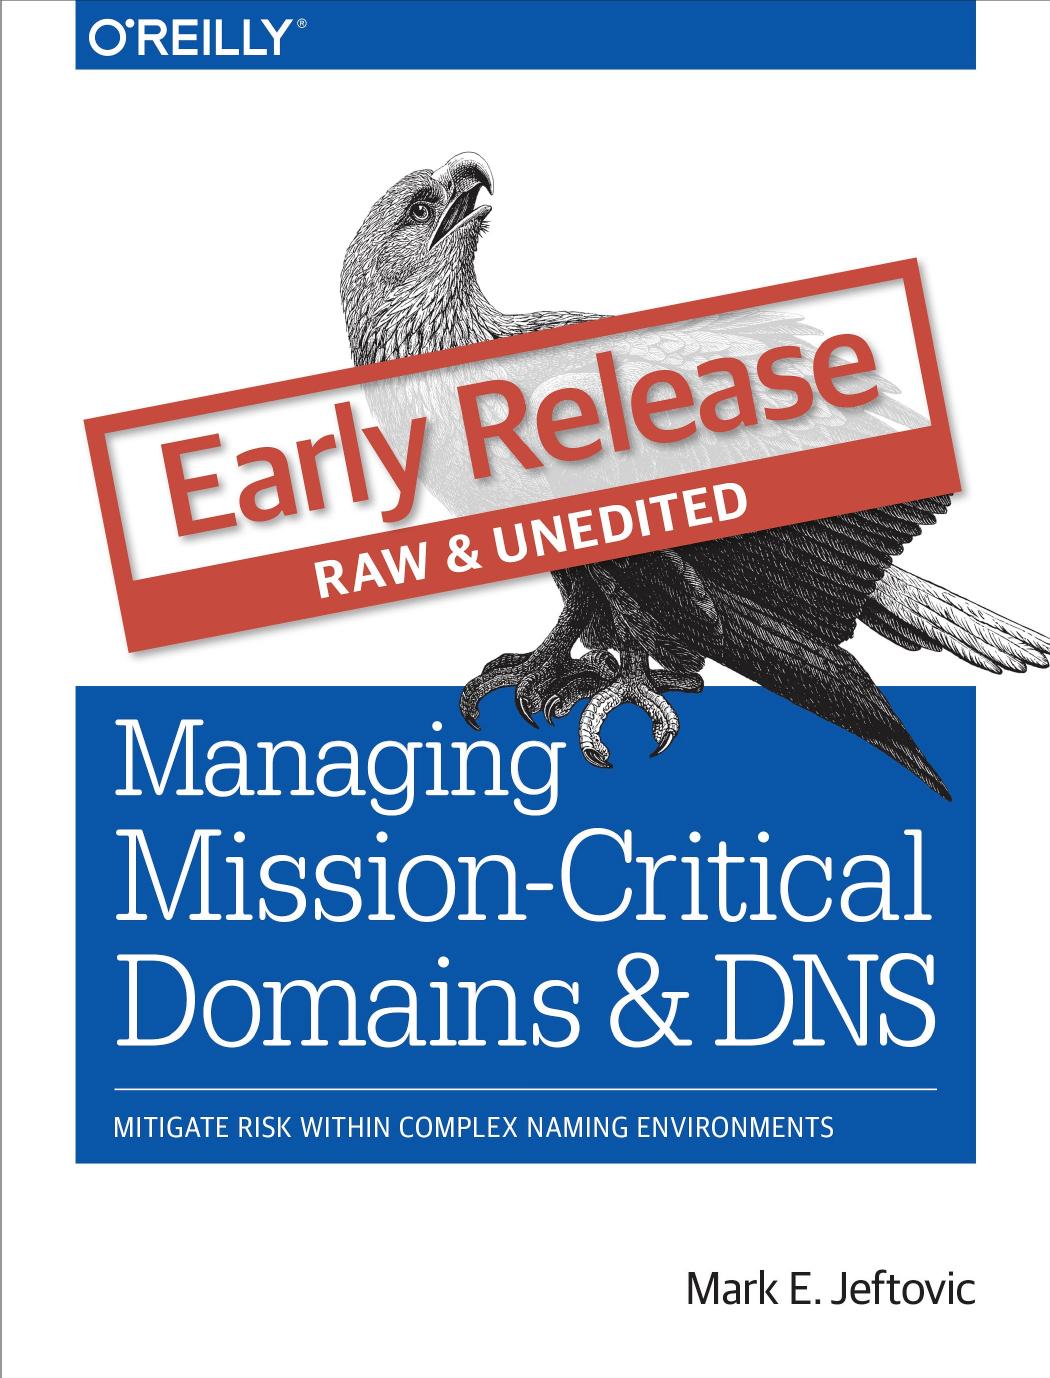 Managing Mission-Critical Domains and DNS by Mark Jeftovic